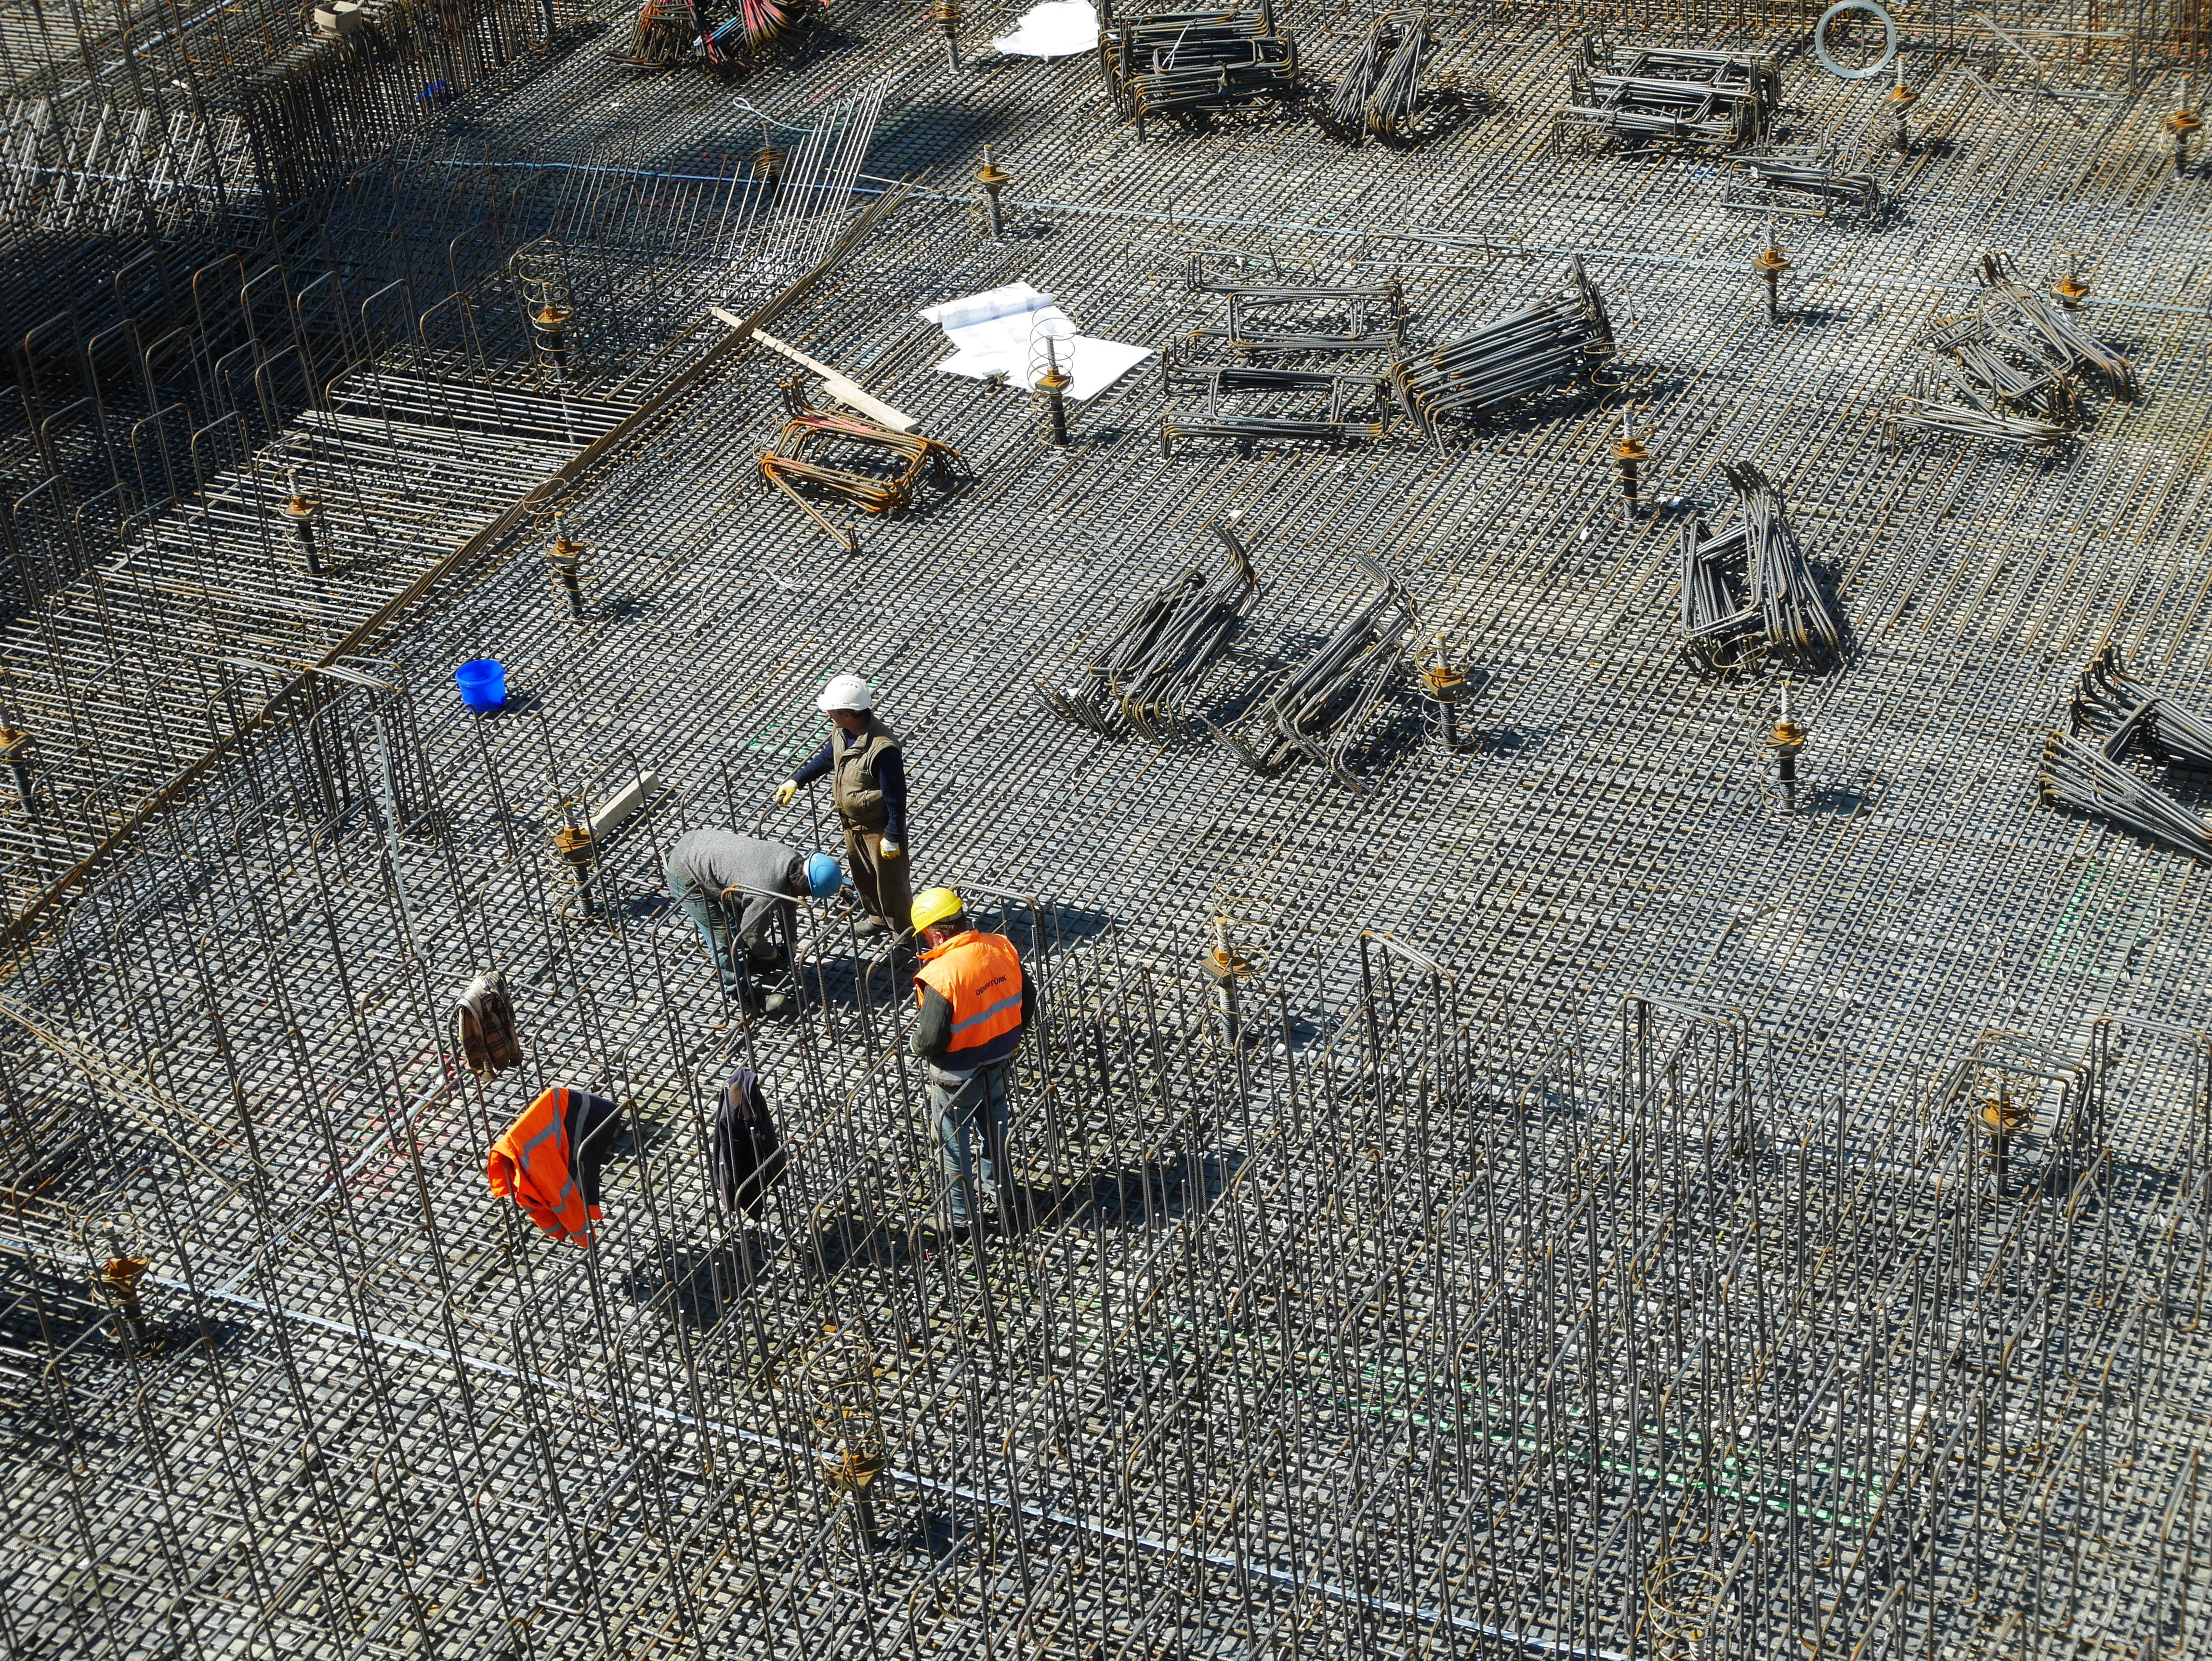 three man working together, construction site, construction workers